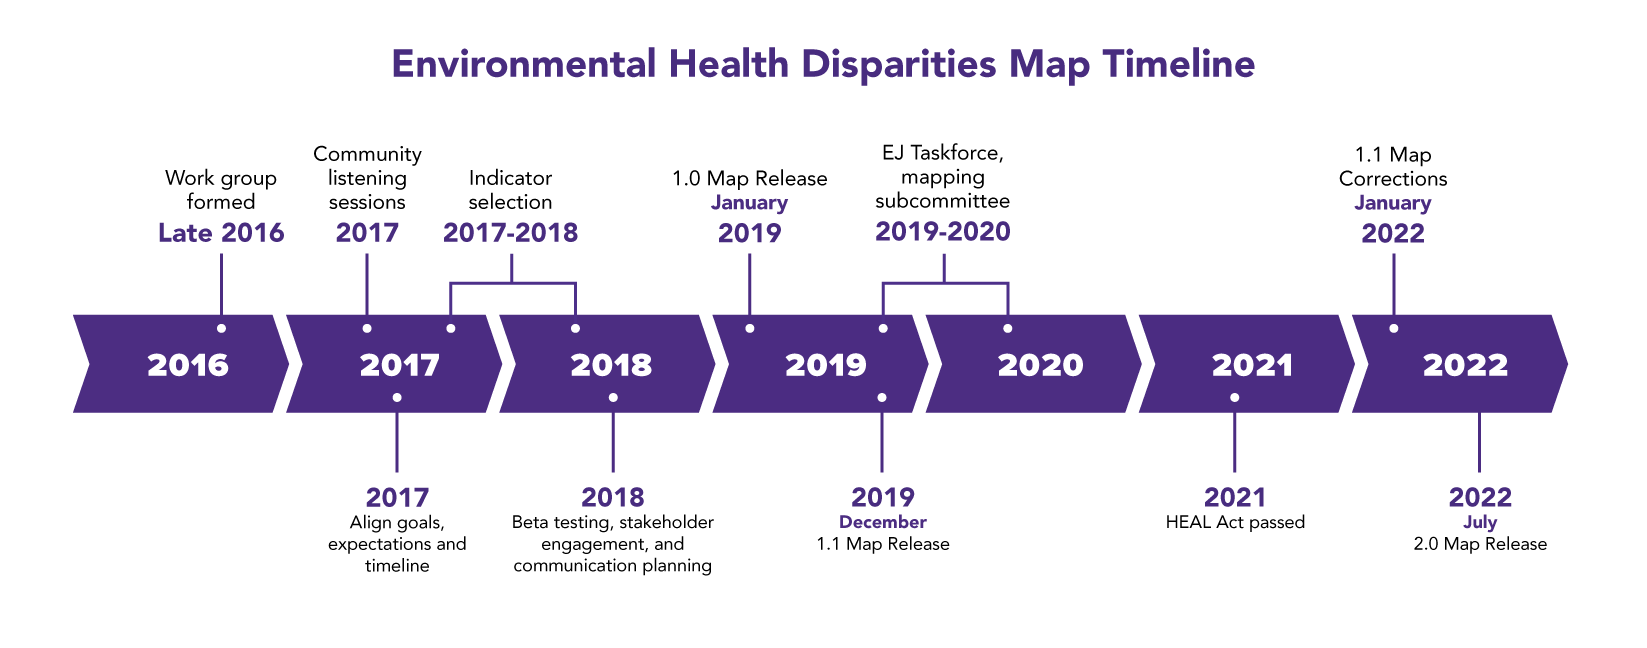 Timeline of the development of the Environmental Health Disparities map from 2016 to 2022